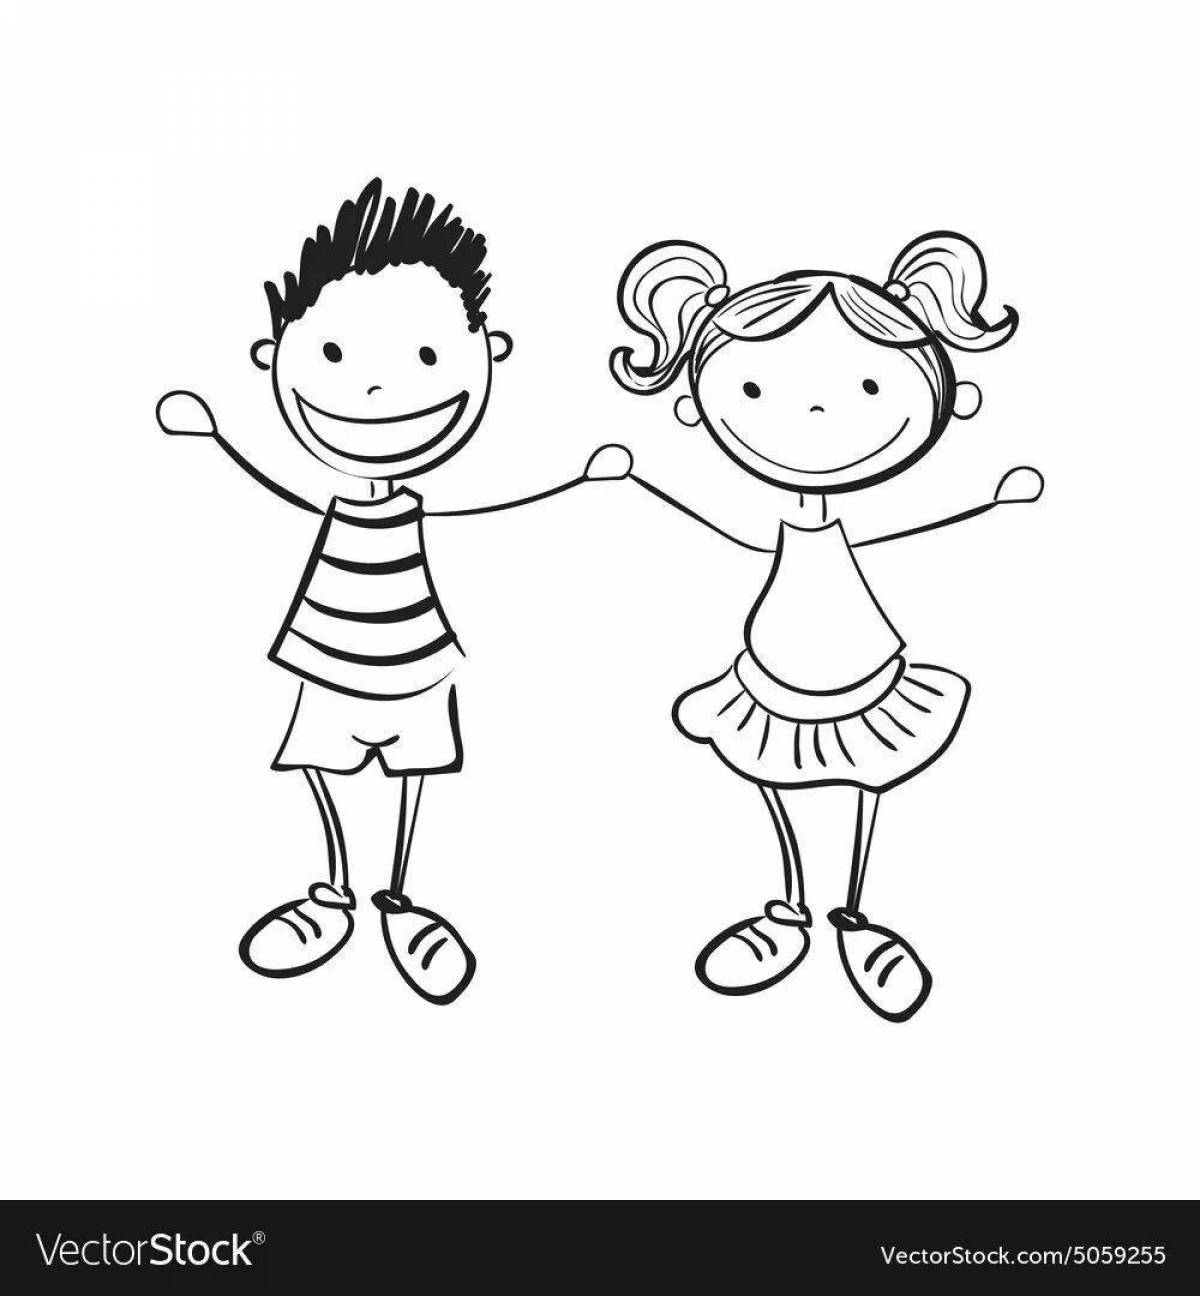 Coloring page friendly boy and girl holding hands